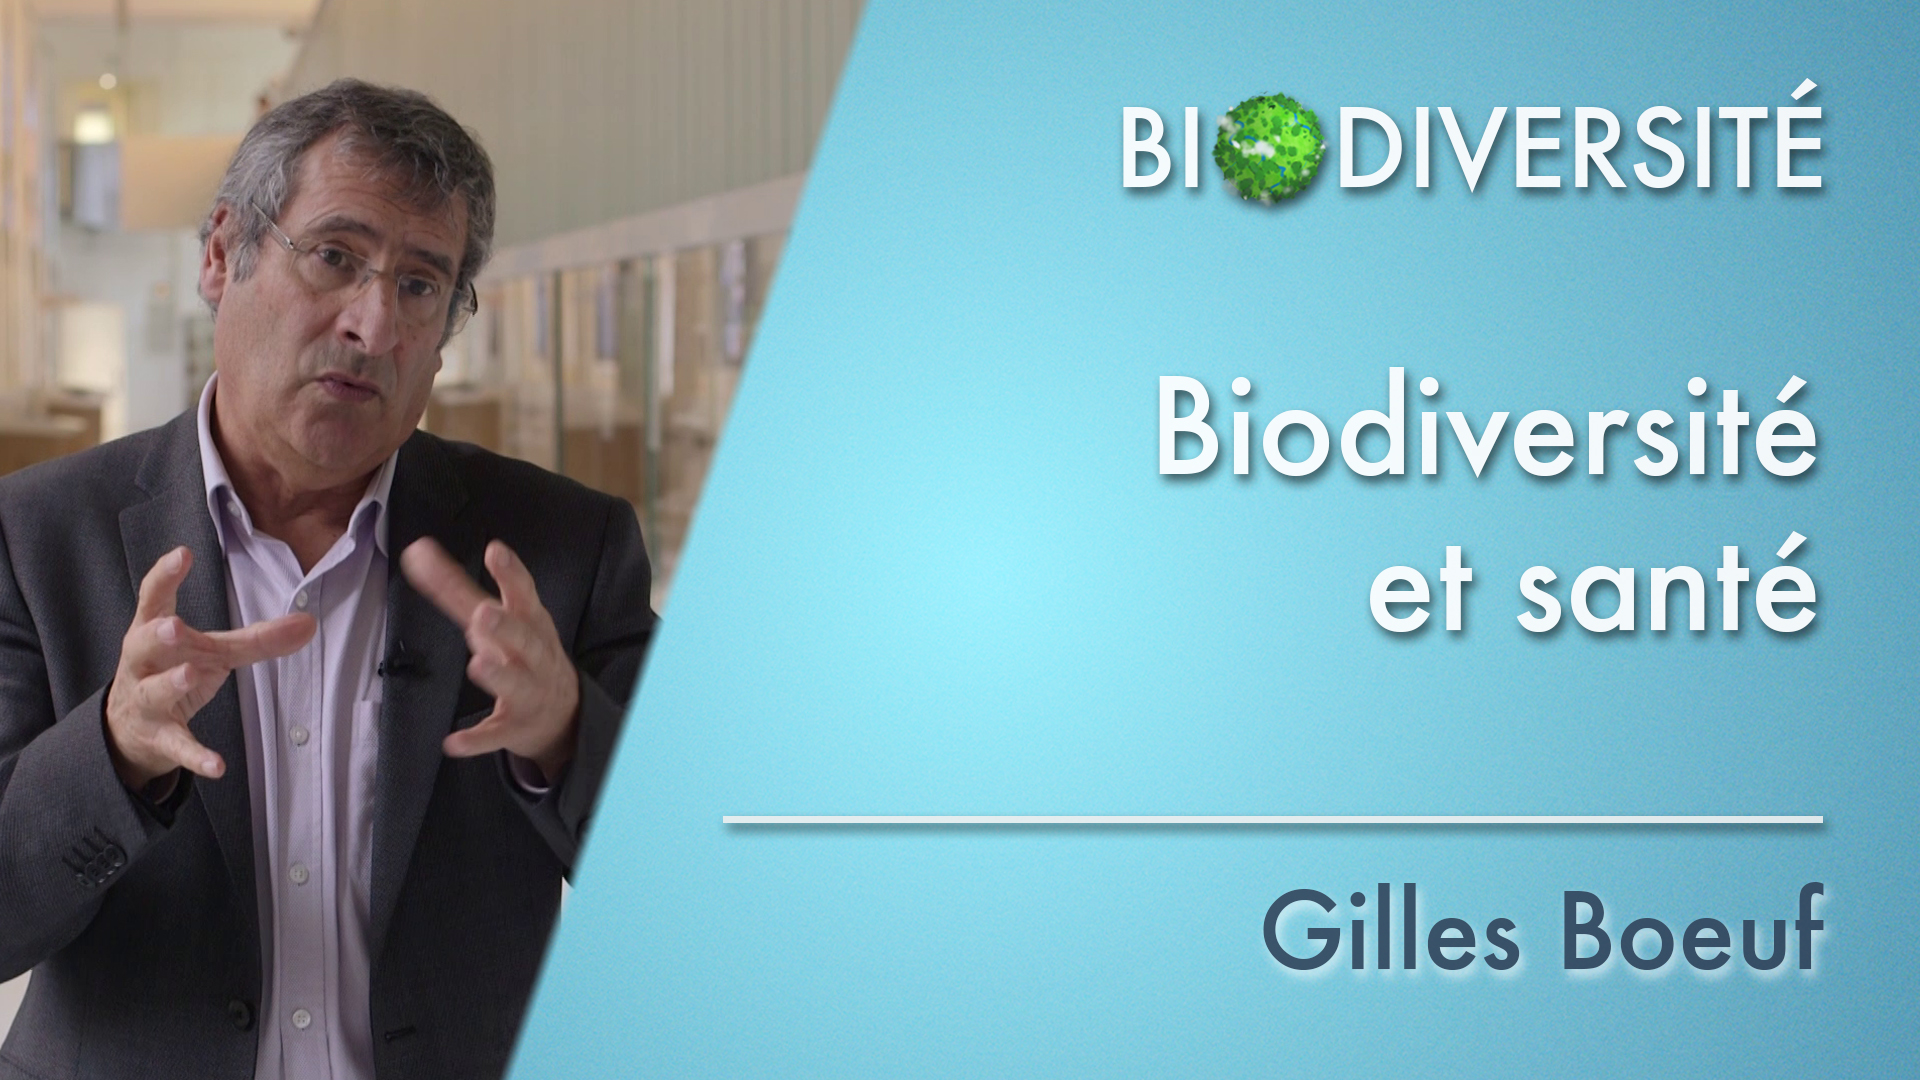 Biodiversity and health - Introduction